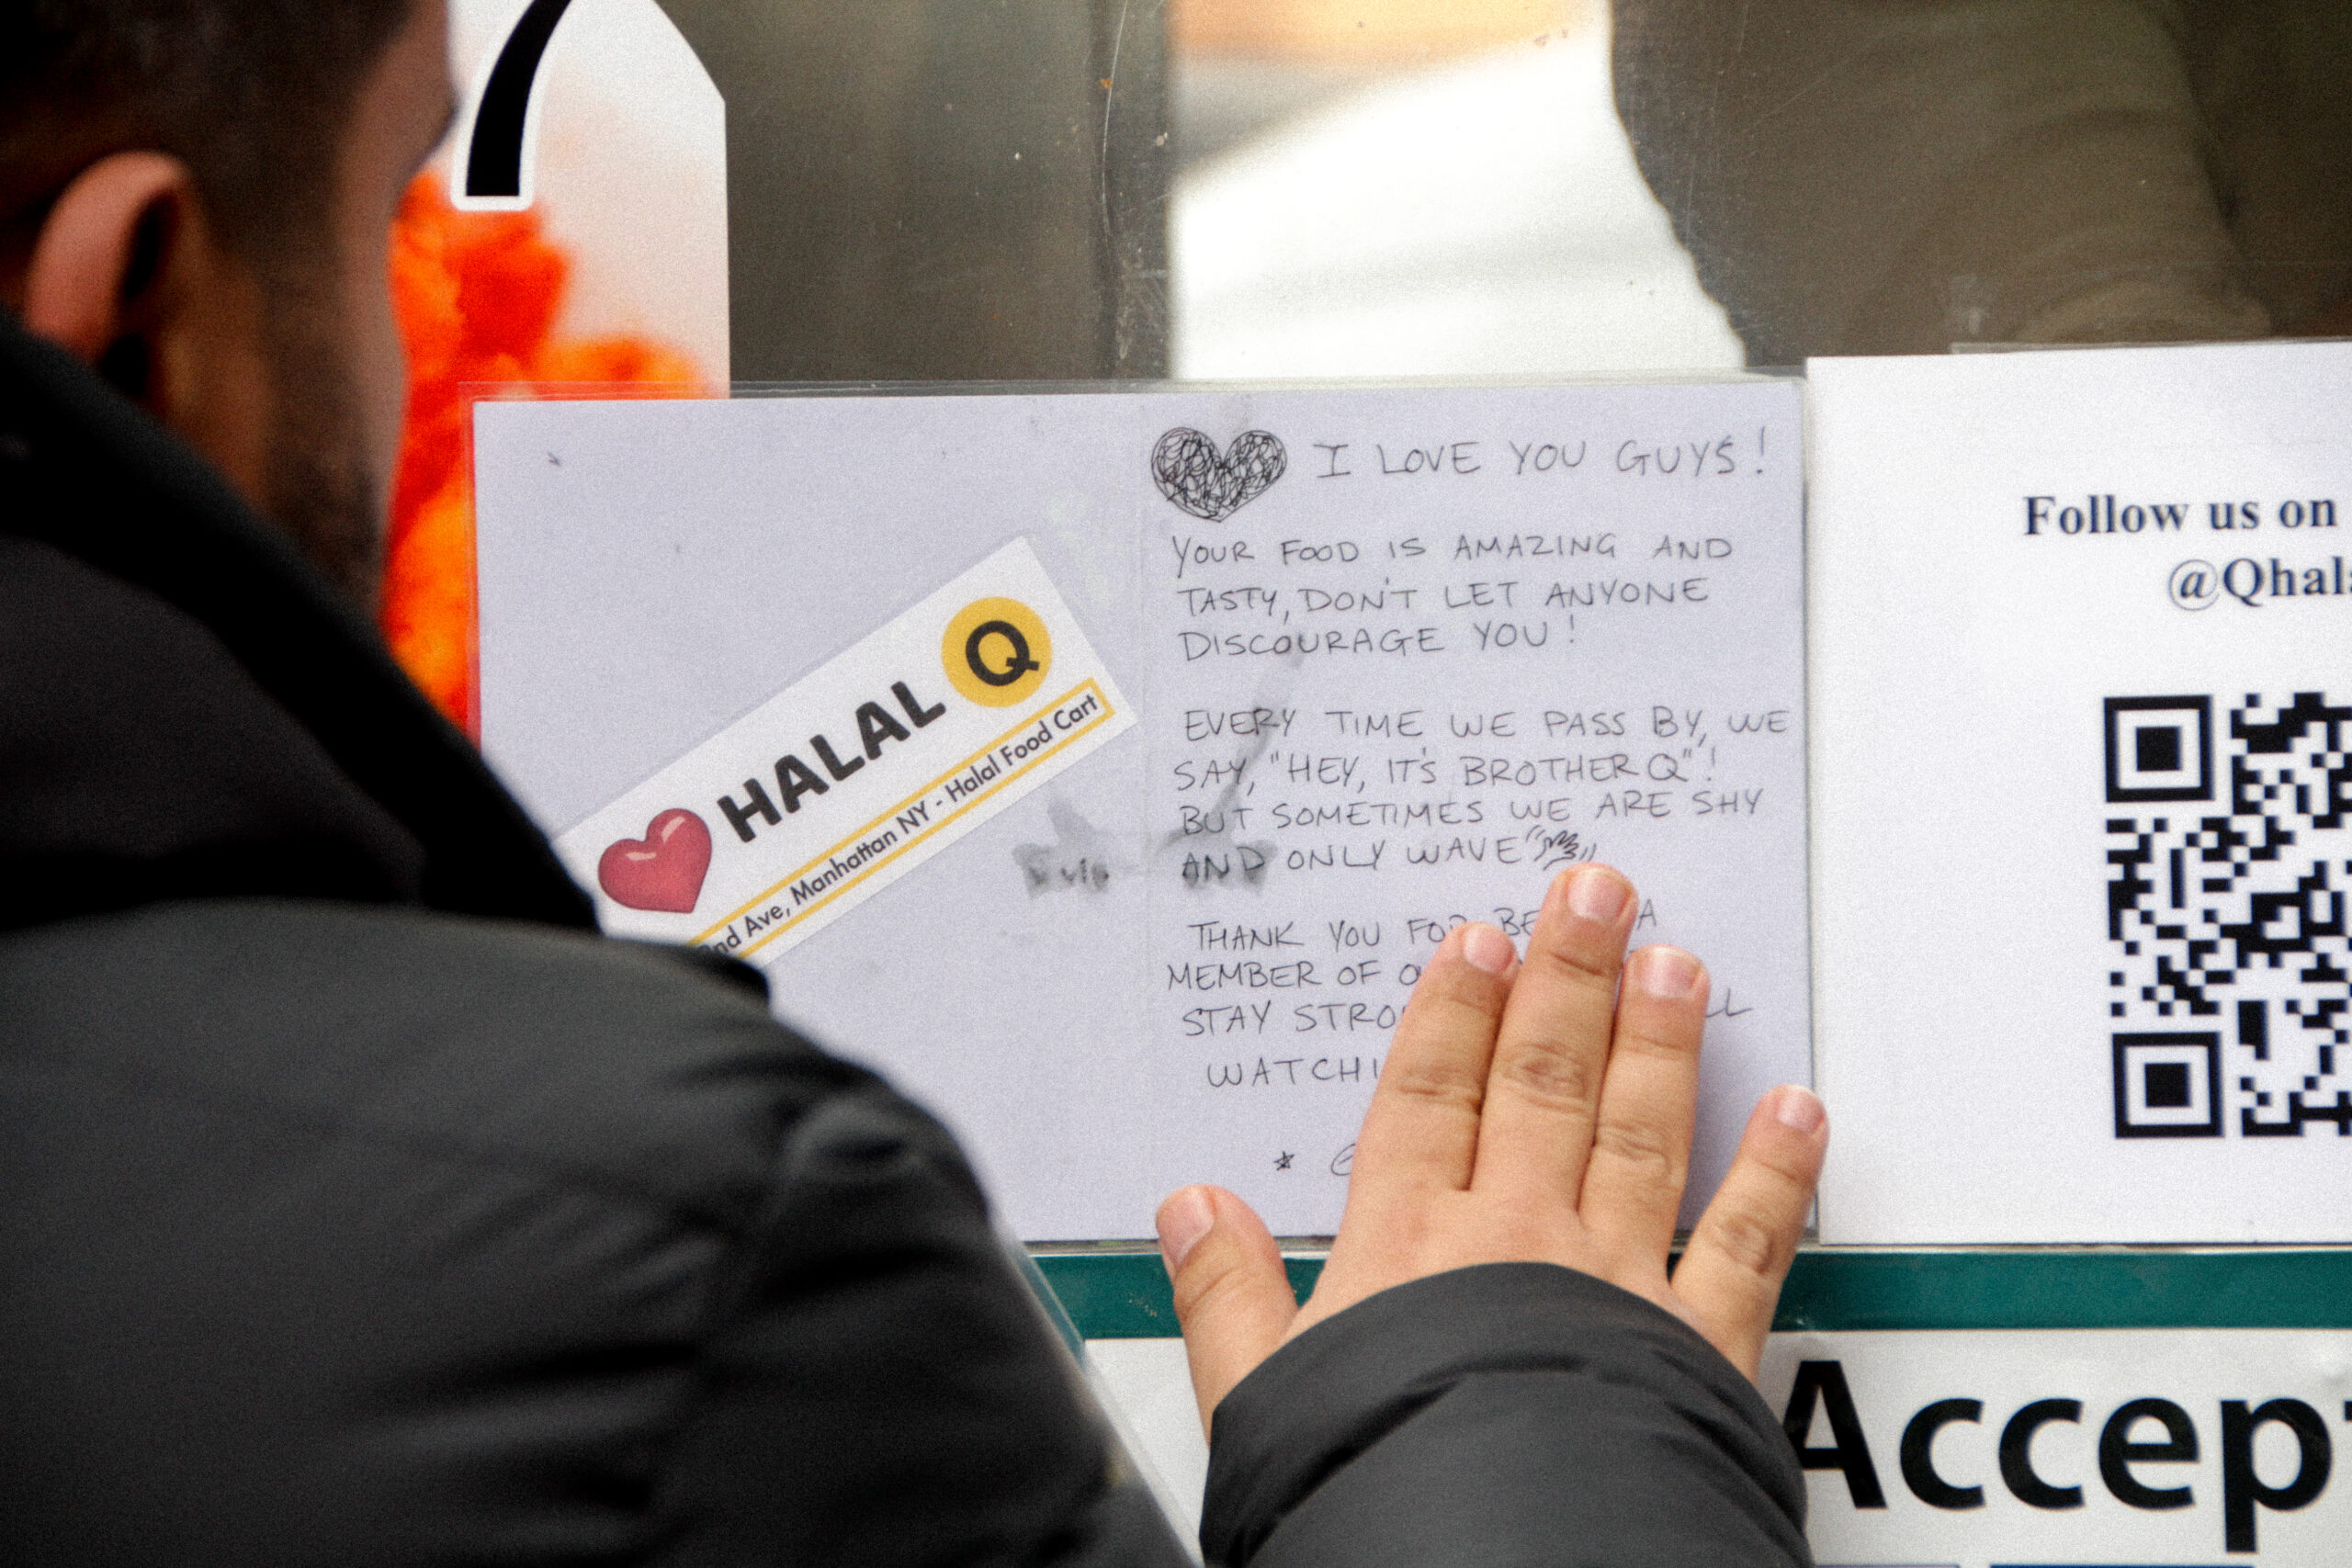 Islam Moustafa, 41, co-owner of Adam Halal Cart, props up a laminated card from a customer on the window of the Halal Cart. “Stay strong,” it says. “We are all watching.” (Credit: Mukta Joshi)